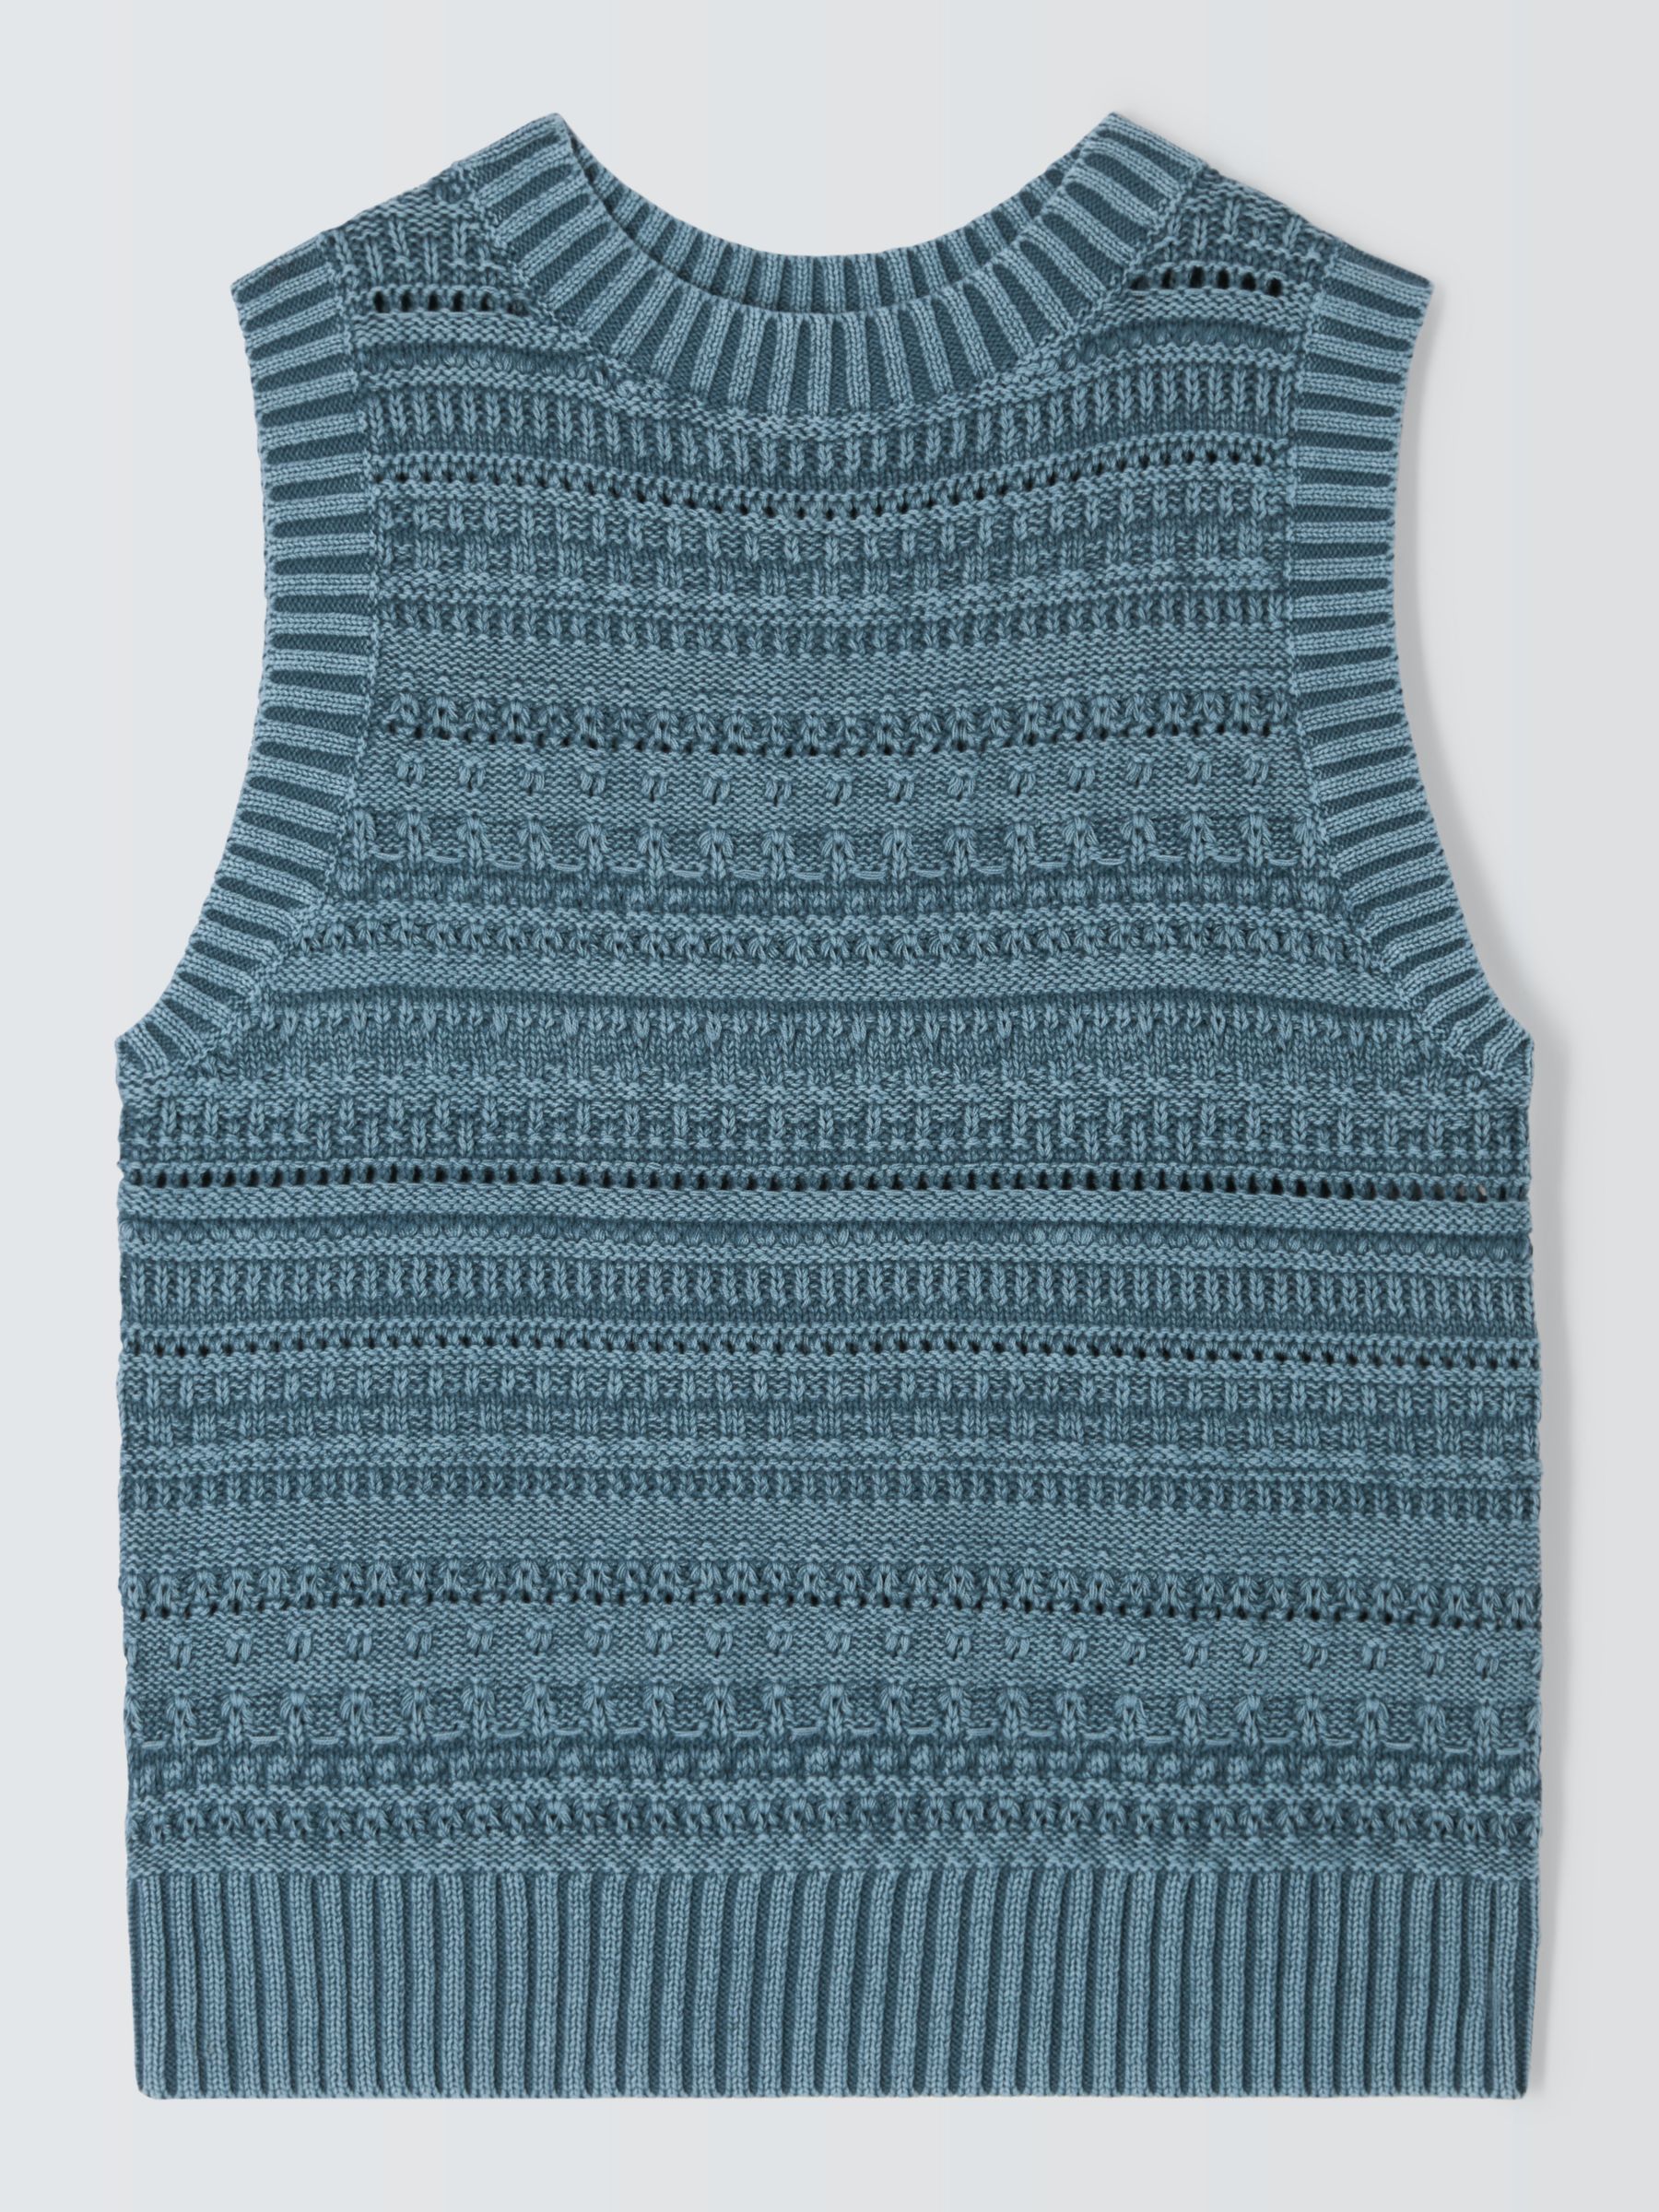 AND/OR Allie Knit Stripe Tank Top, Denim Blue, S